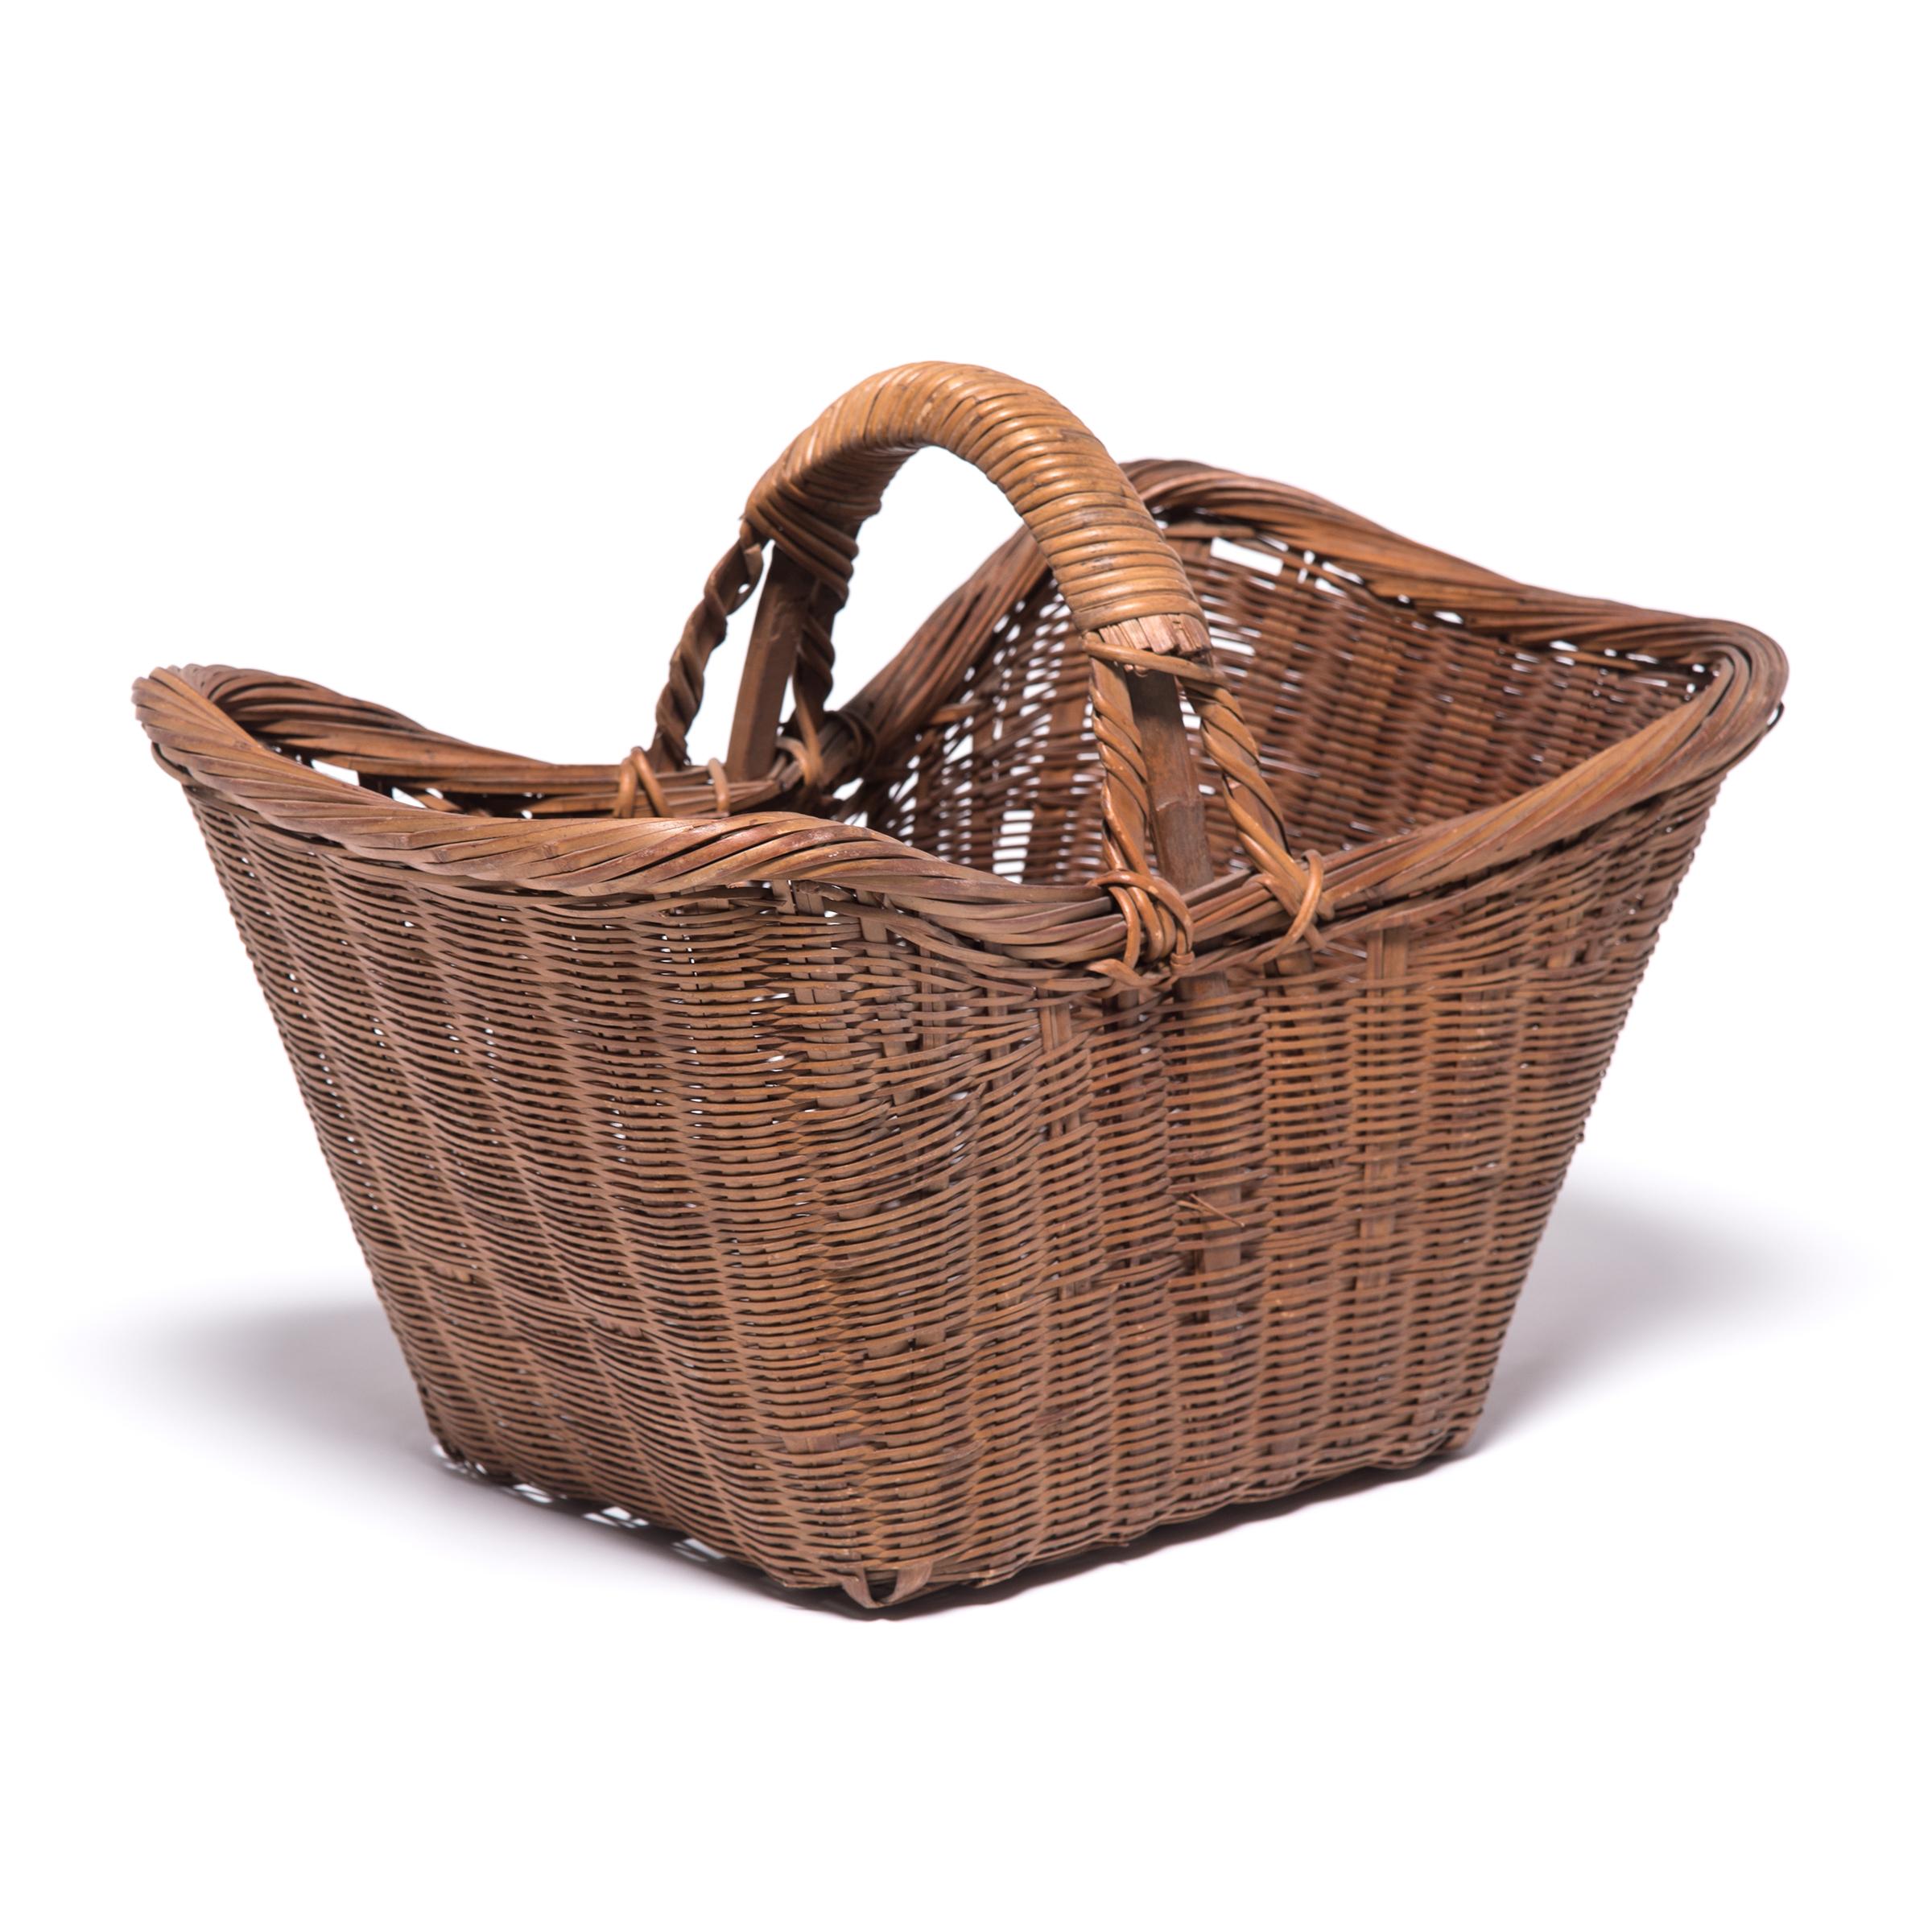 It's easy to imagine someone, long ago, walking to market on a beautiful summer day with this beautiful basket slung over their arm. Basket making is an ancient and humble Craft, but in the hands of a truly skilled weaver willow branches, like